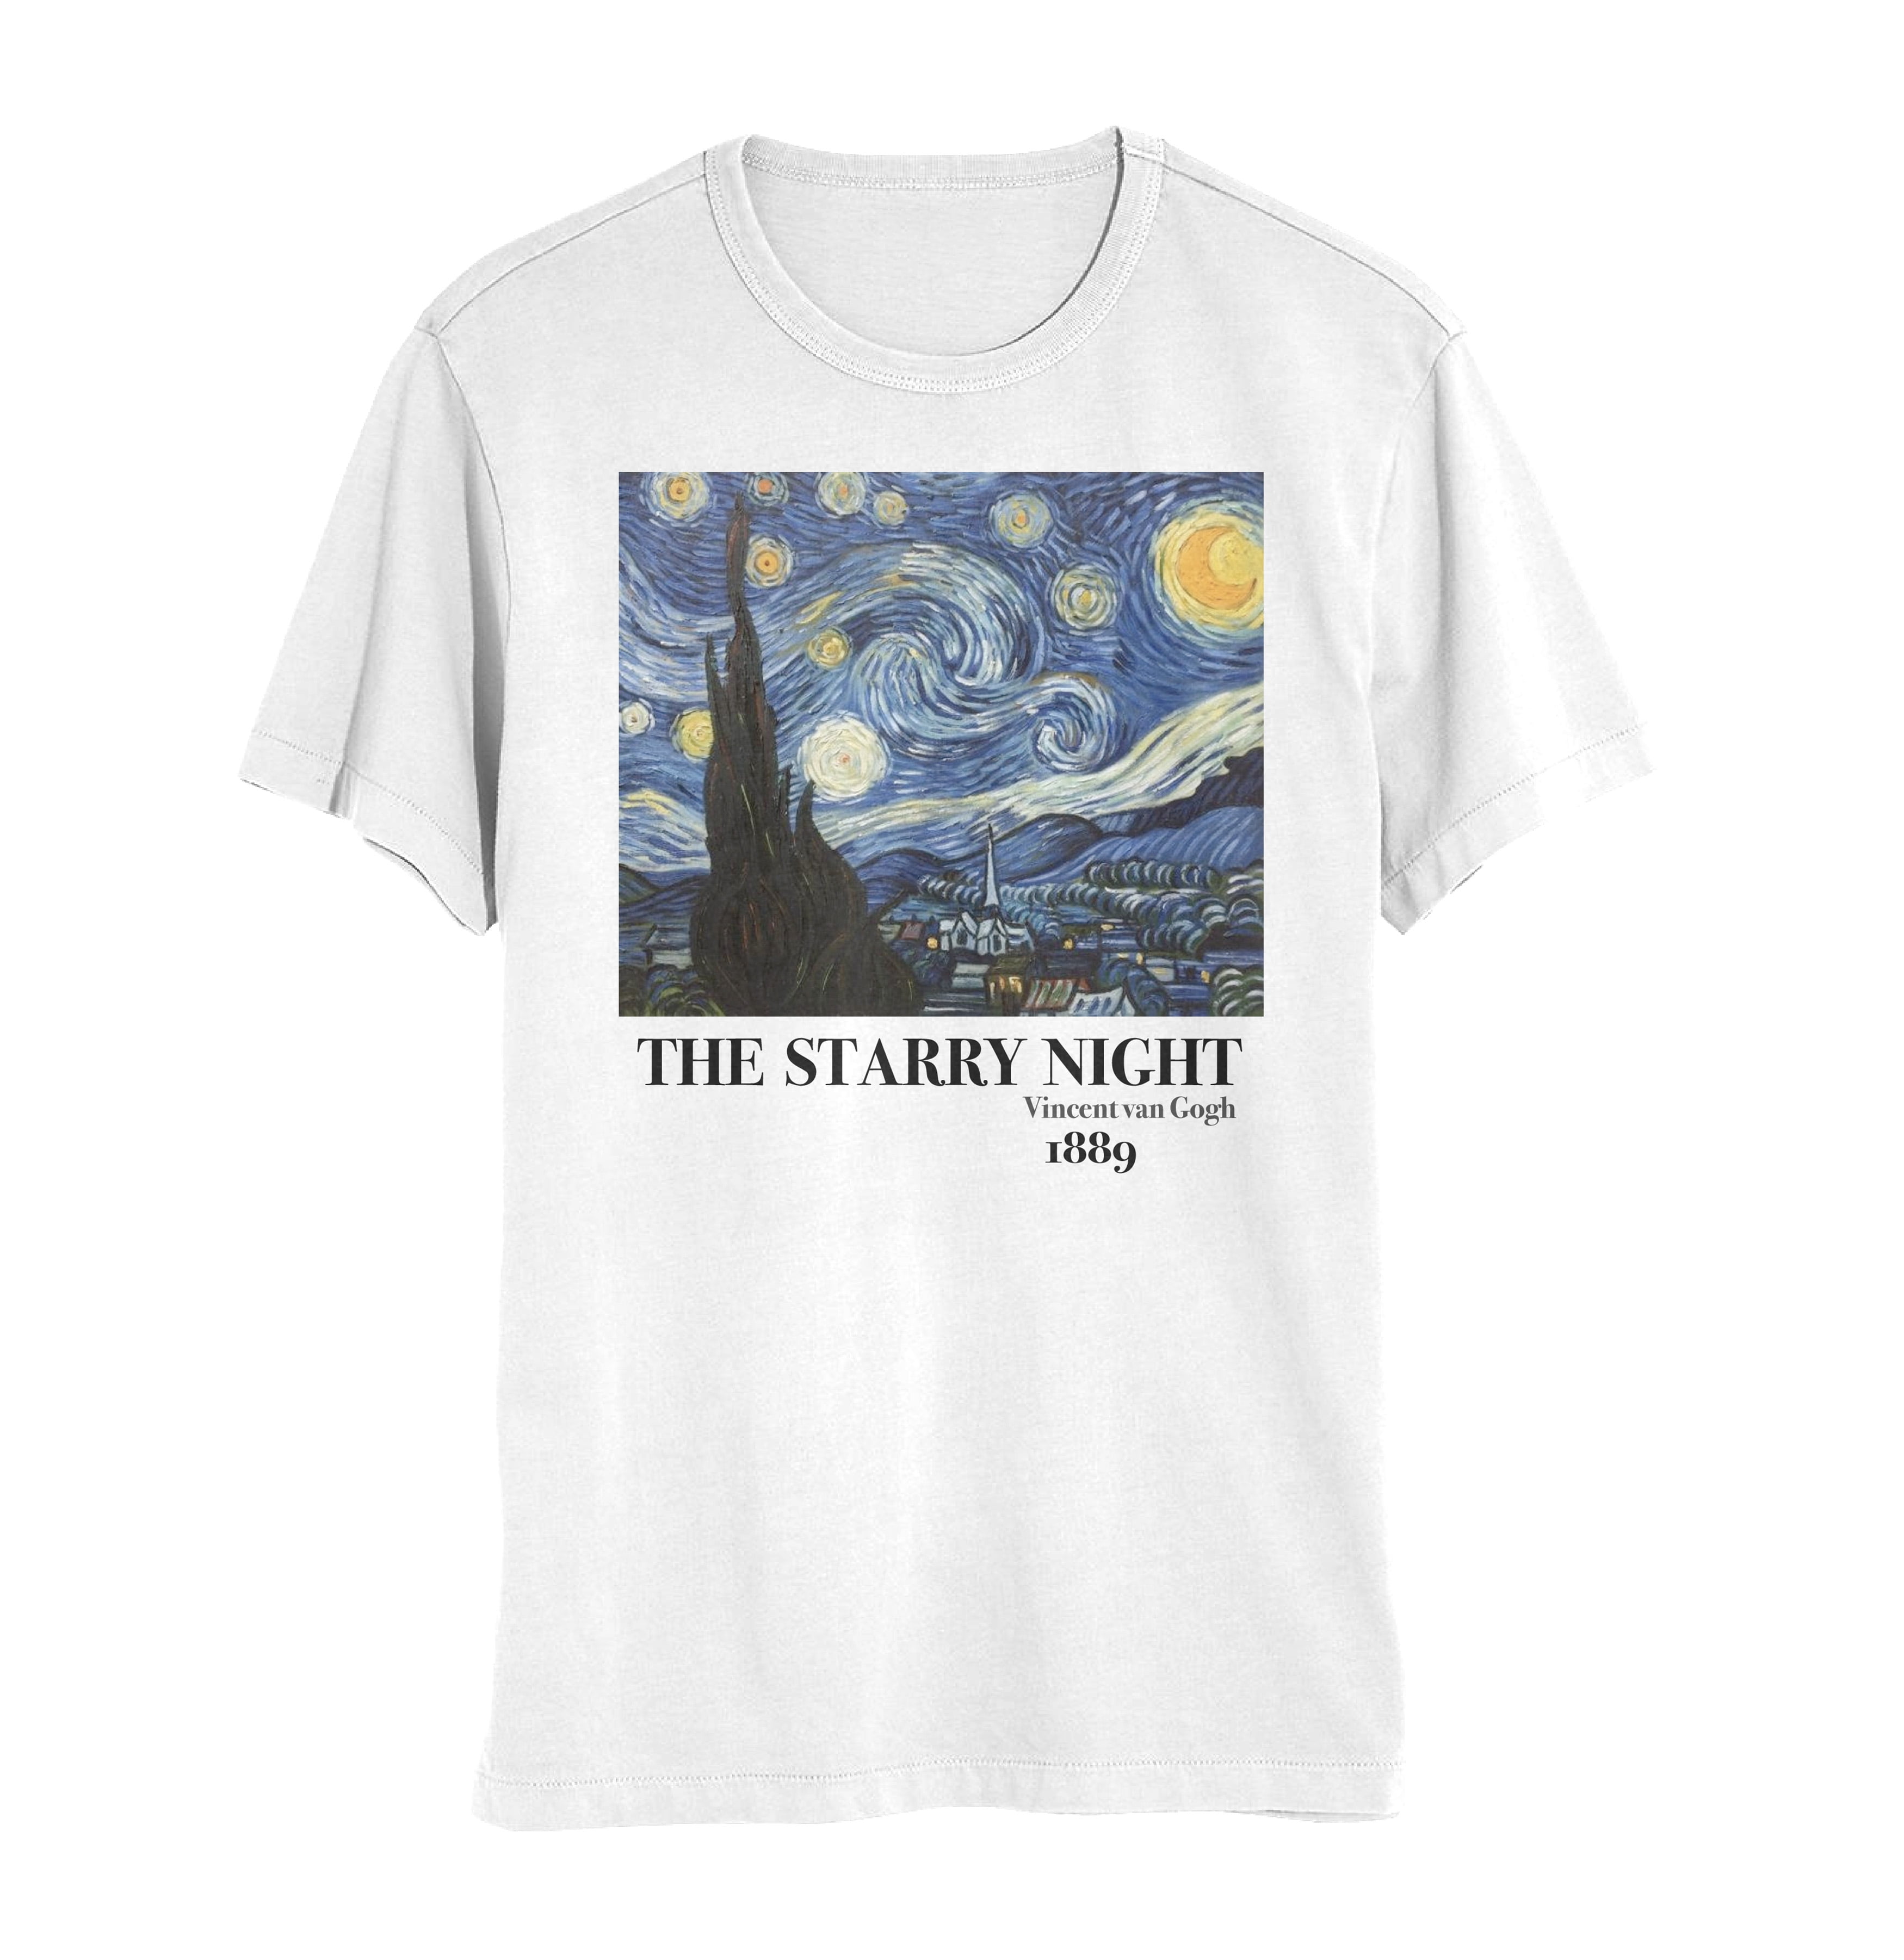 Vincent Van Gogh 1889 The Starry Night Mens and Womens Short Sleeve T-Shirt  (White, S-XXL)